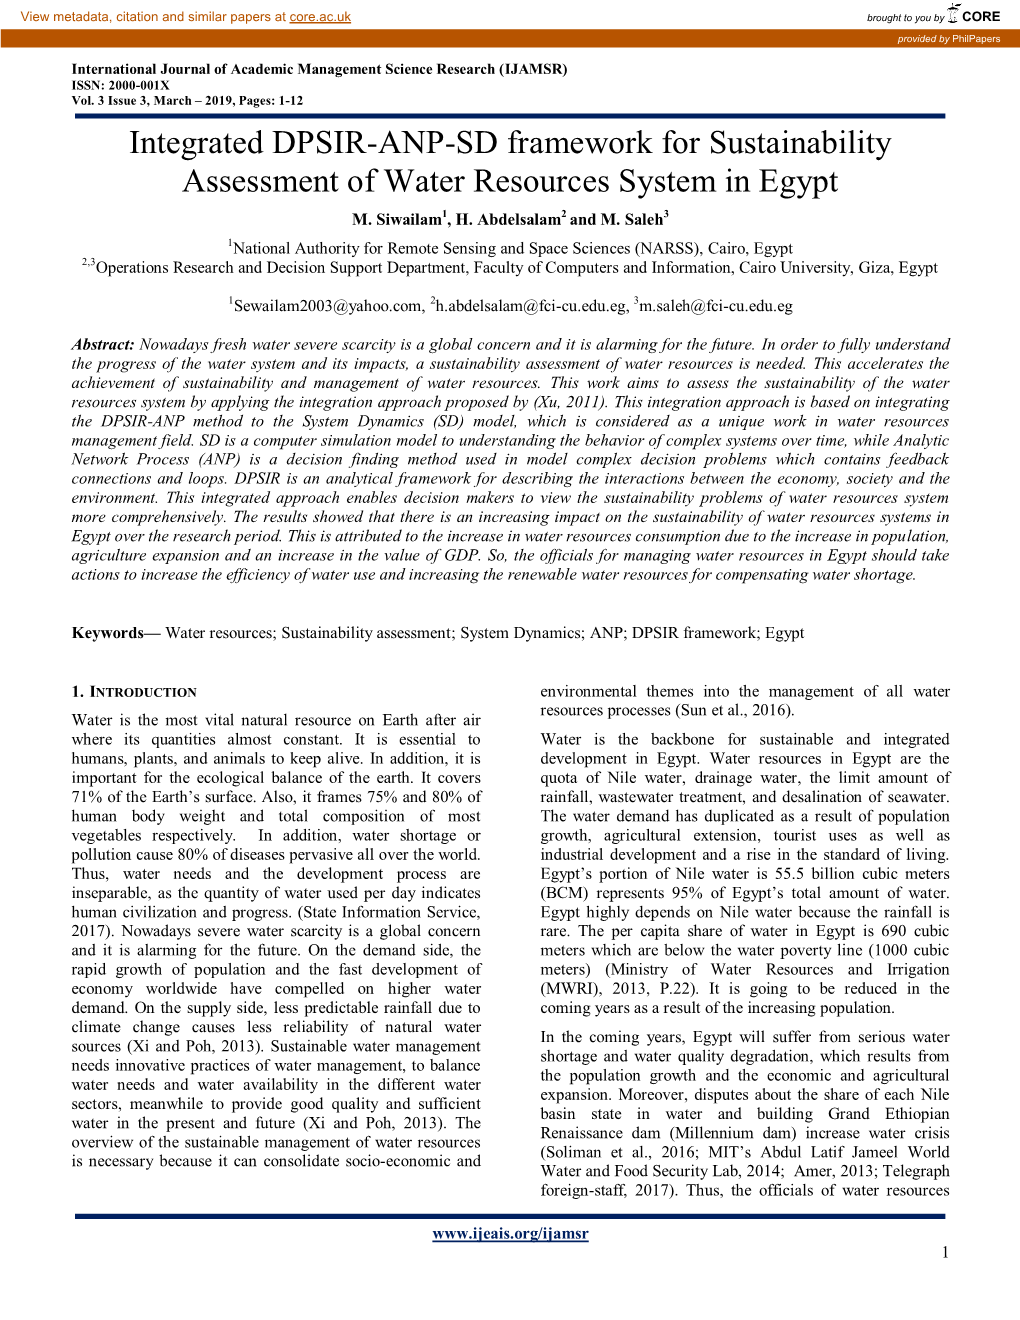 Integrated DPSIR-ANP-SD Framework for Sustainability Assessment of Water Resources System in Egypt M